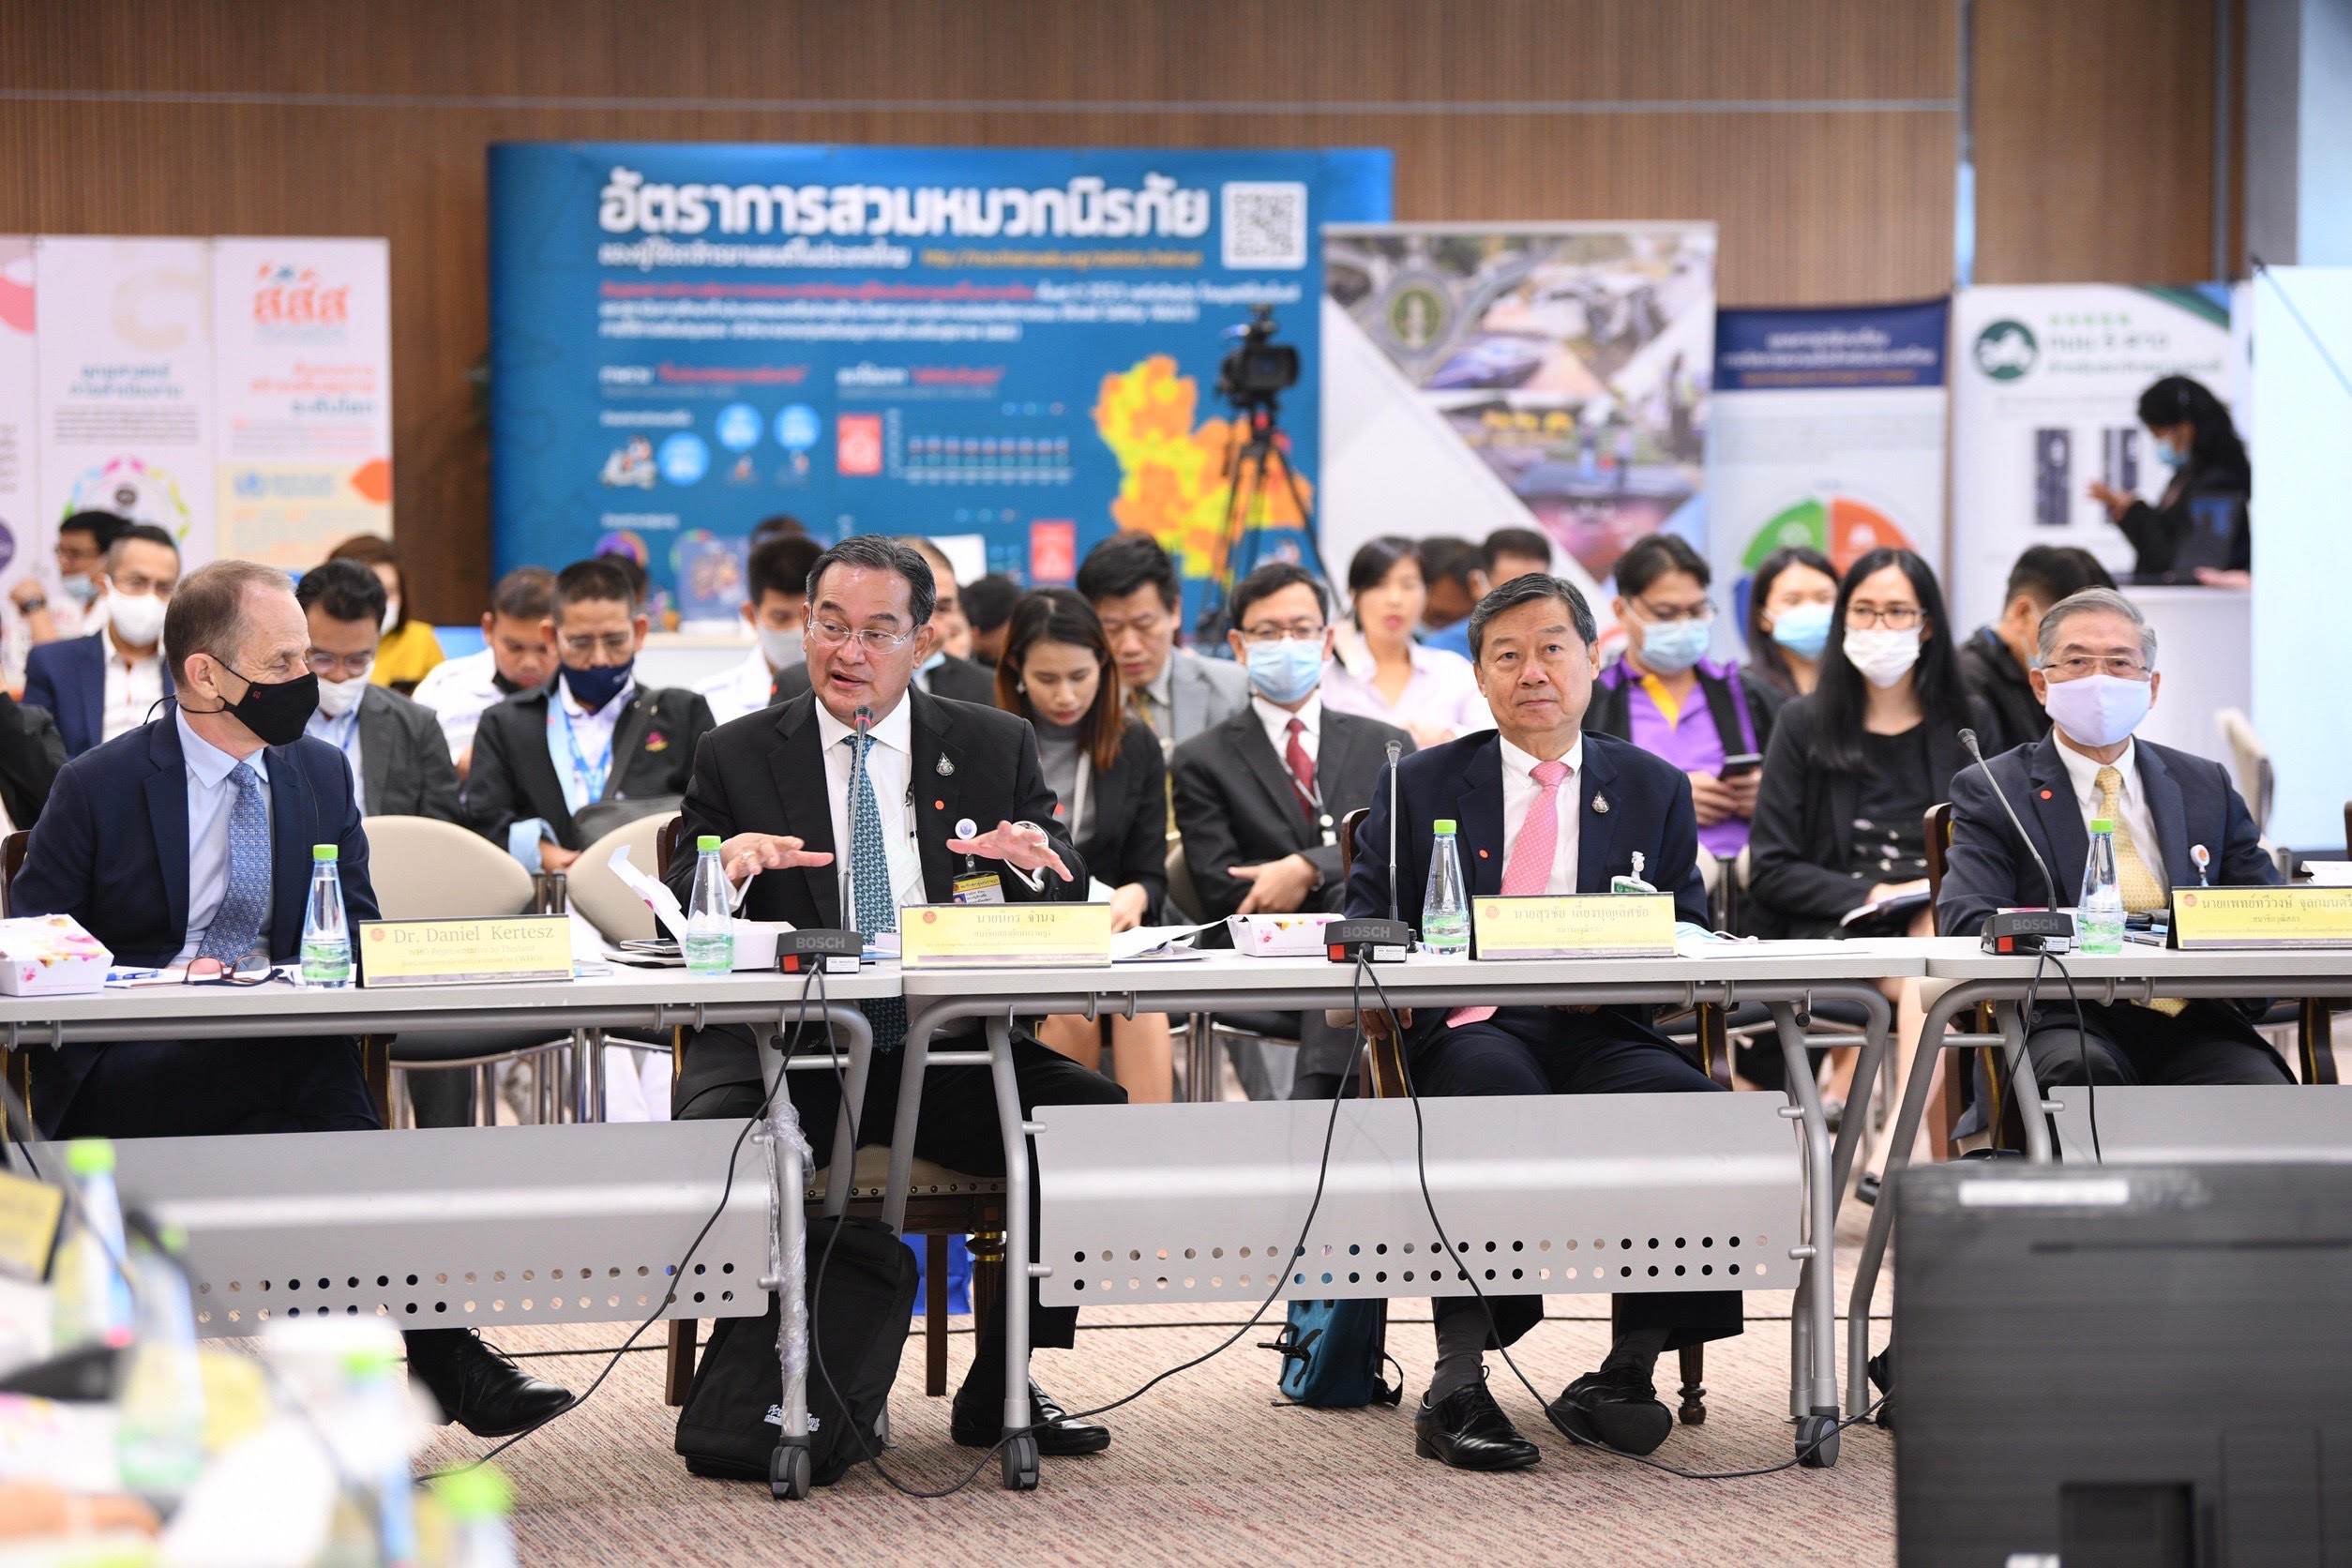 ThaiHealth joins hands with partners to reduce accidents and promote road safety thaihealth